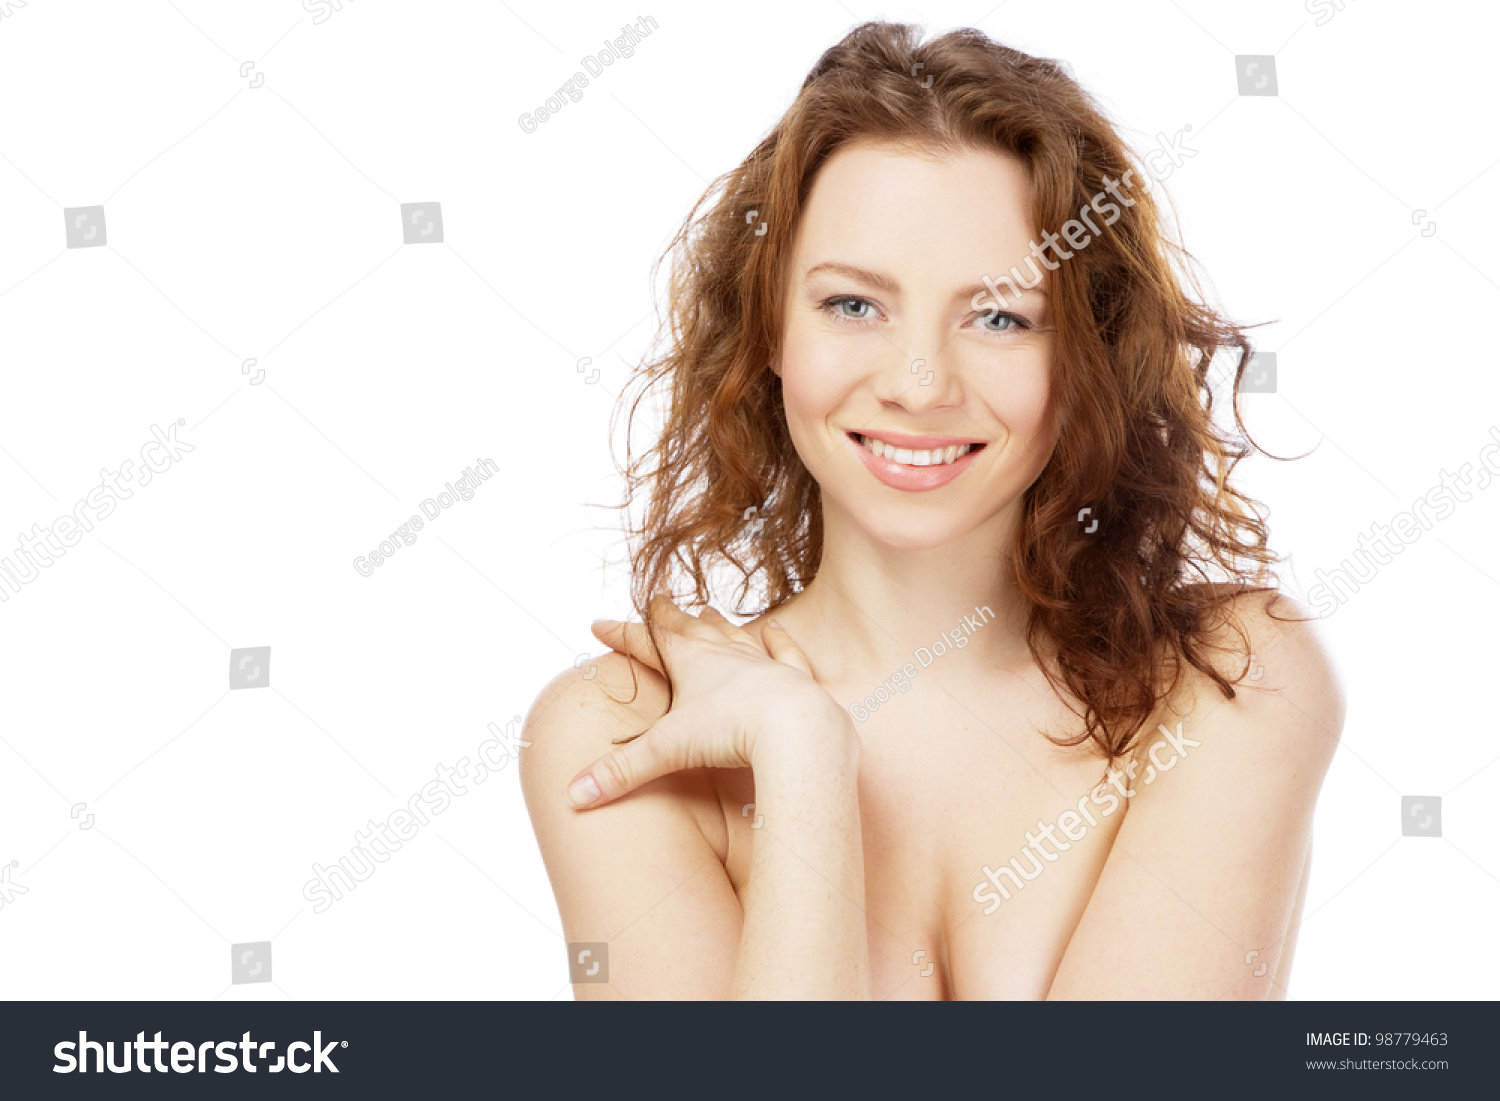 Face portrait of a beautiful topless model #98779463